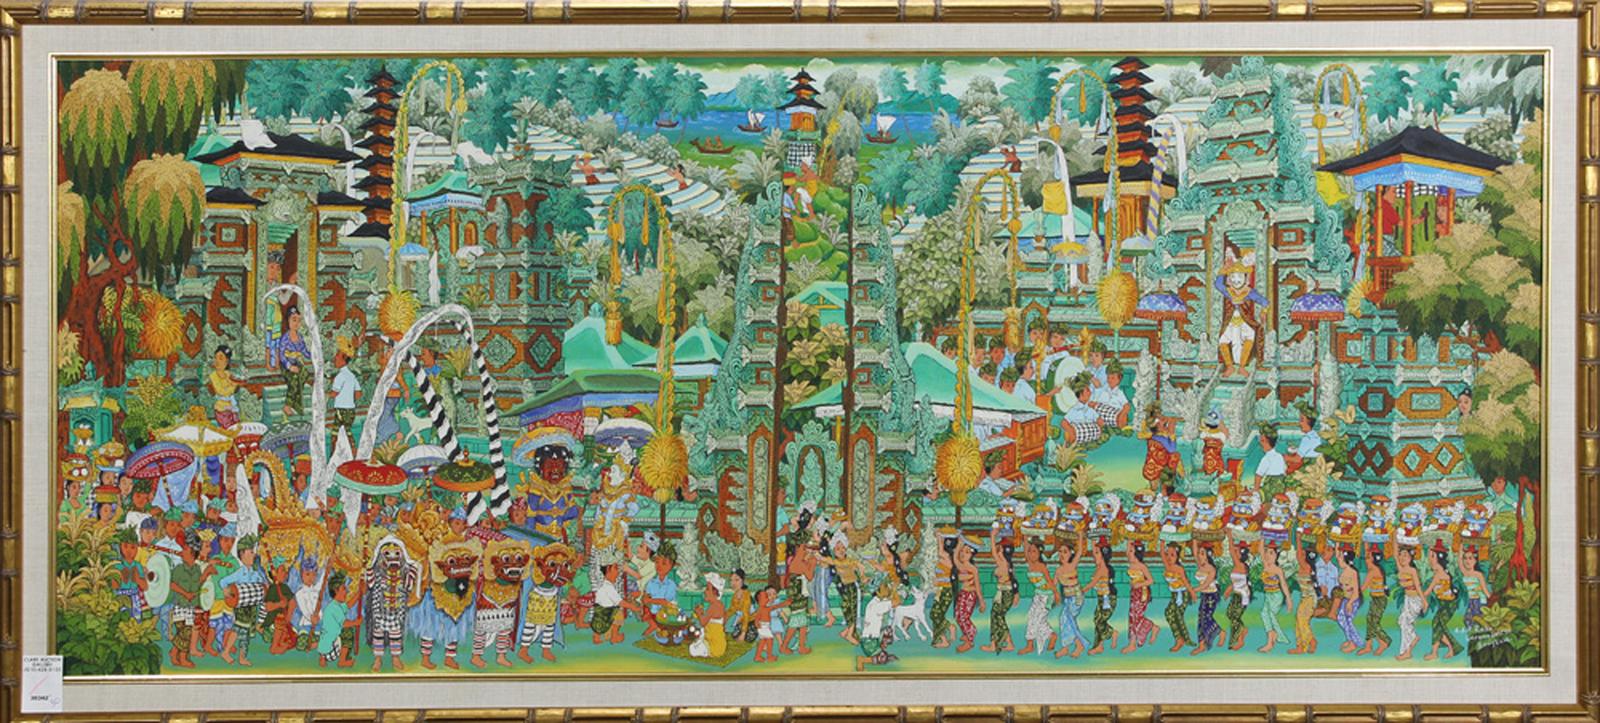 A Balinese painting depicting temple and festivities in a village